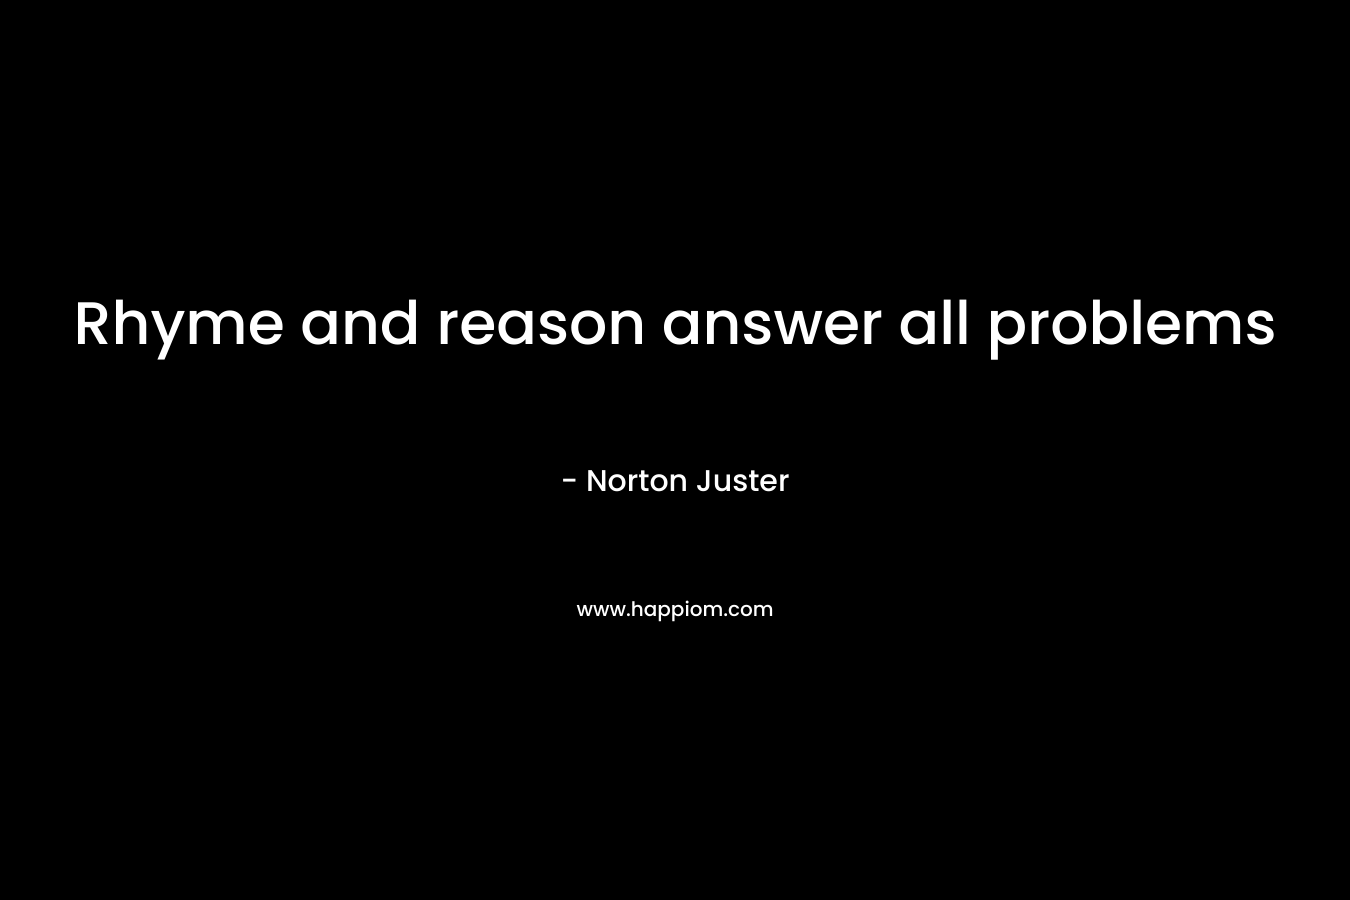 Rhyme and reason answer all problems – Norton Juster